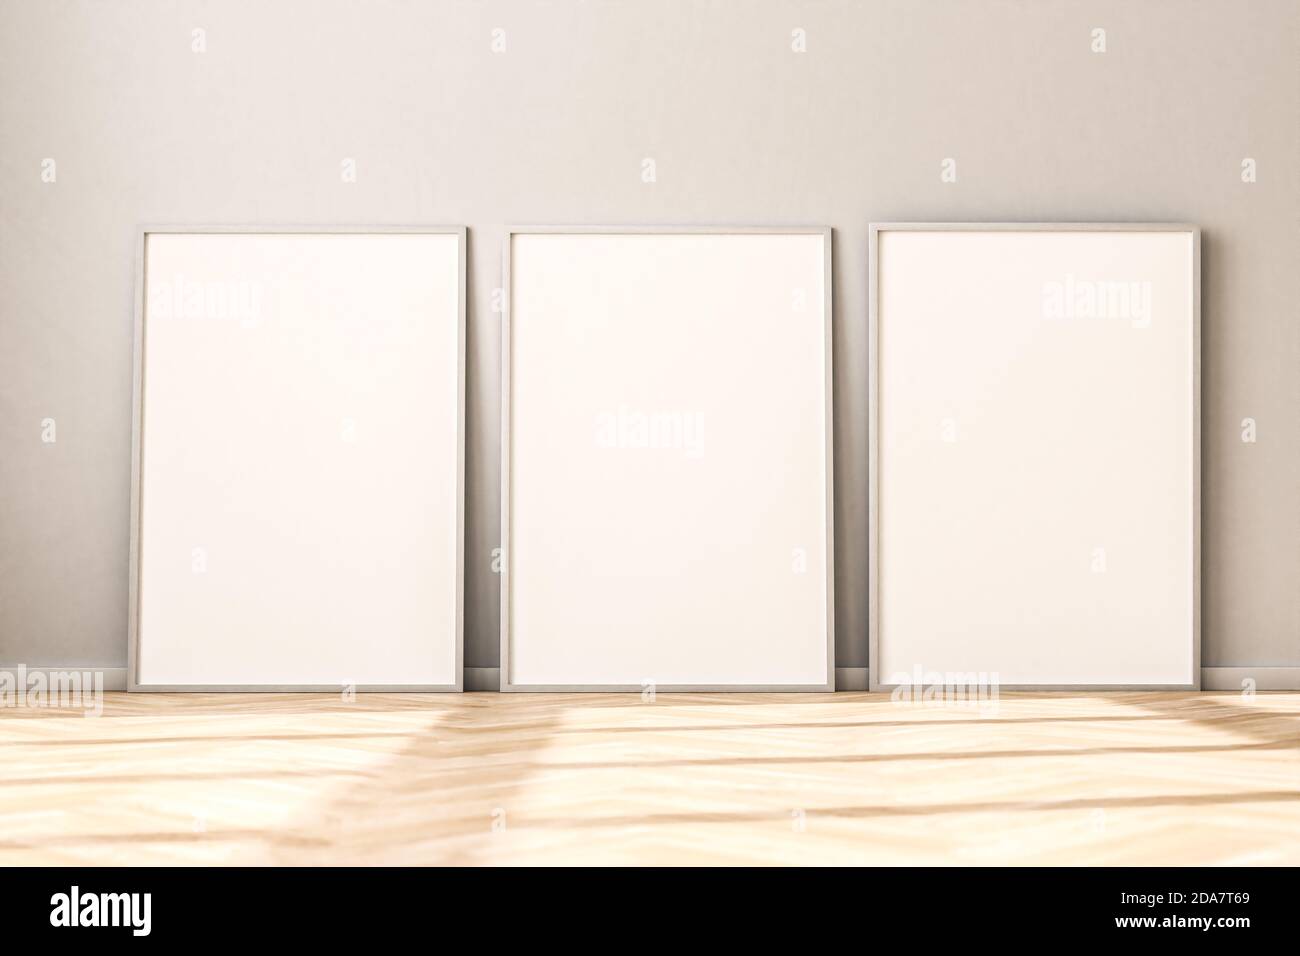 Three empty Picture Frames on parquet floor leaning against bright wall. Sunlight flooding in from the left. 3d render mockup. Stock Photo